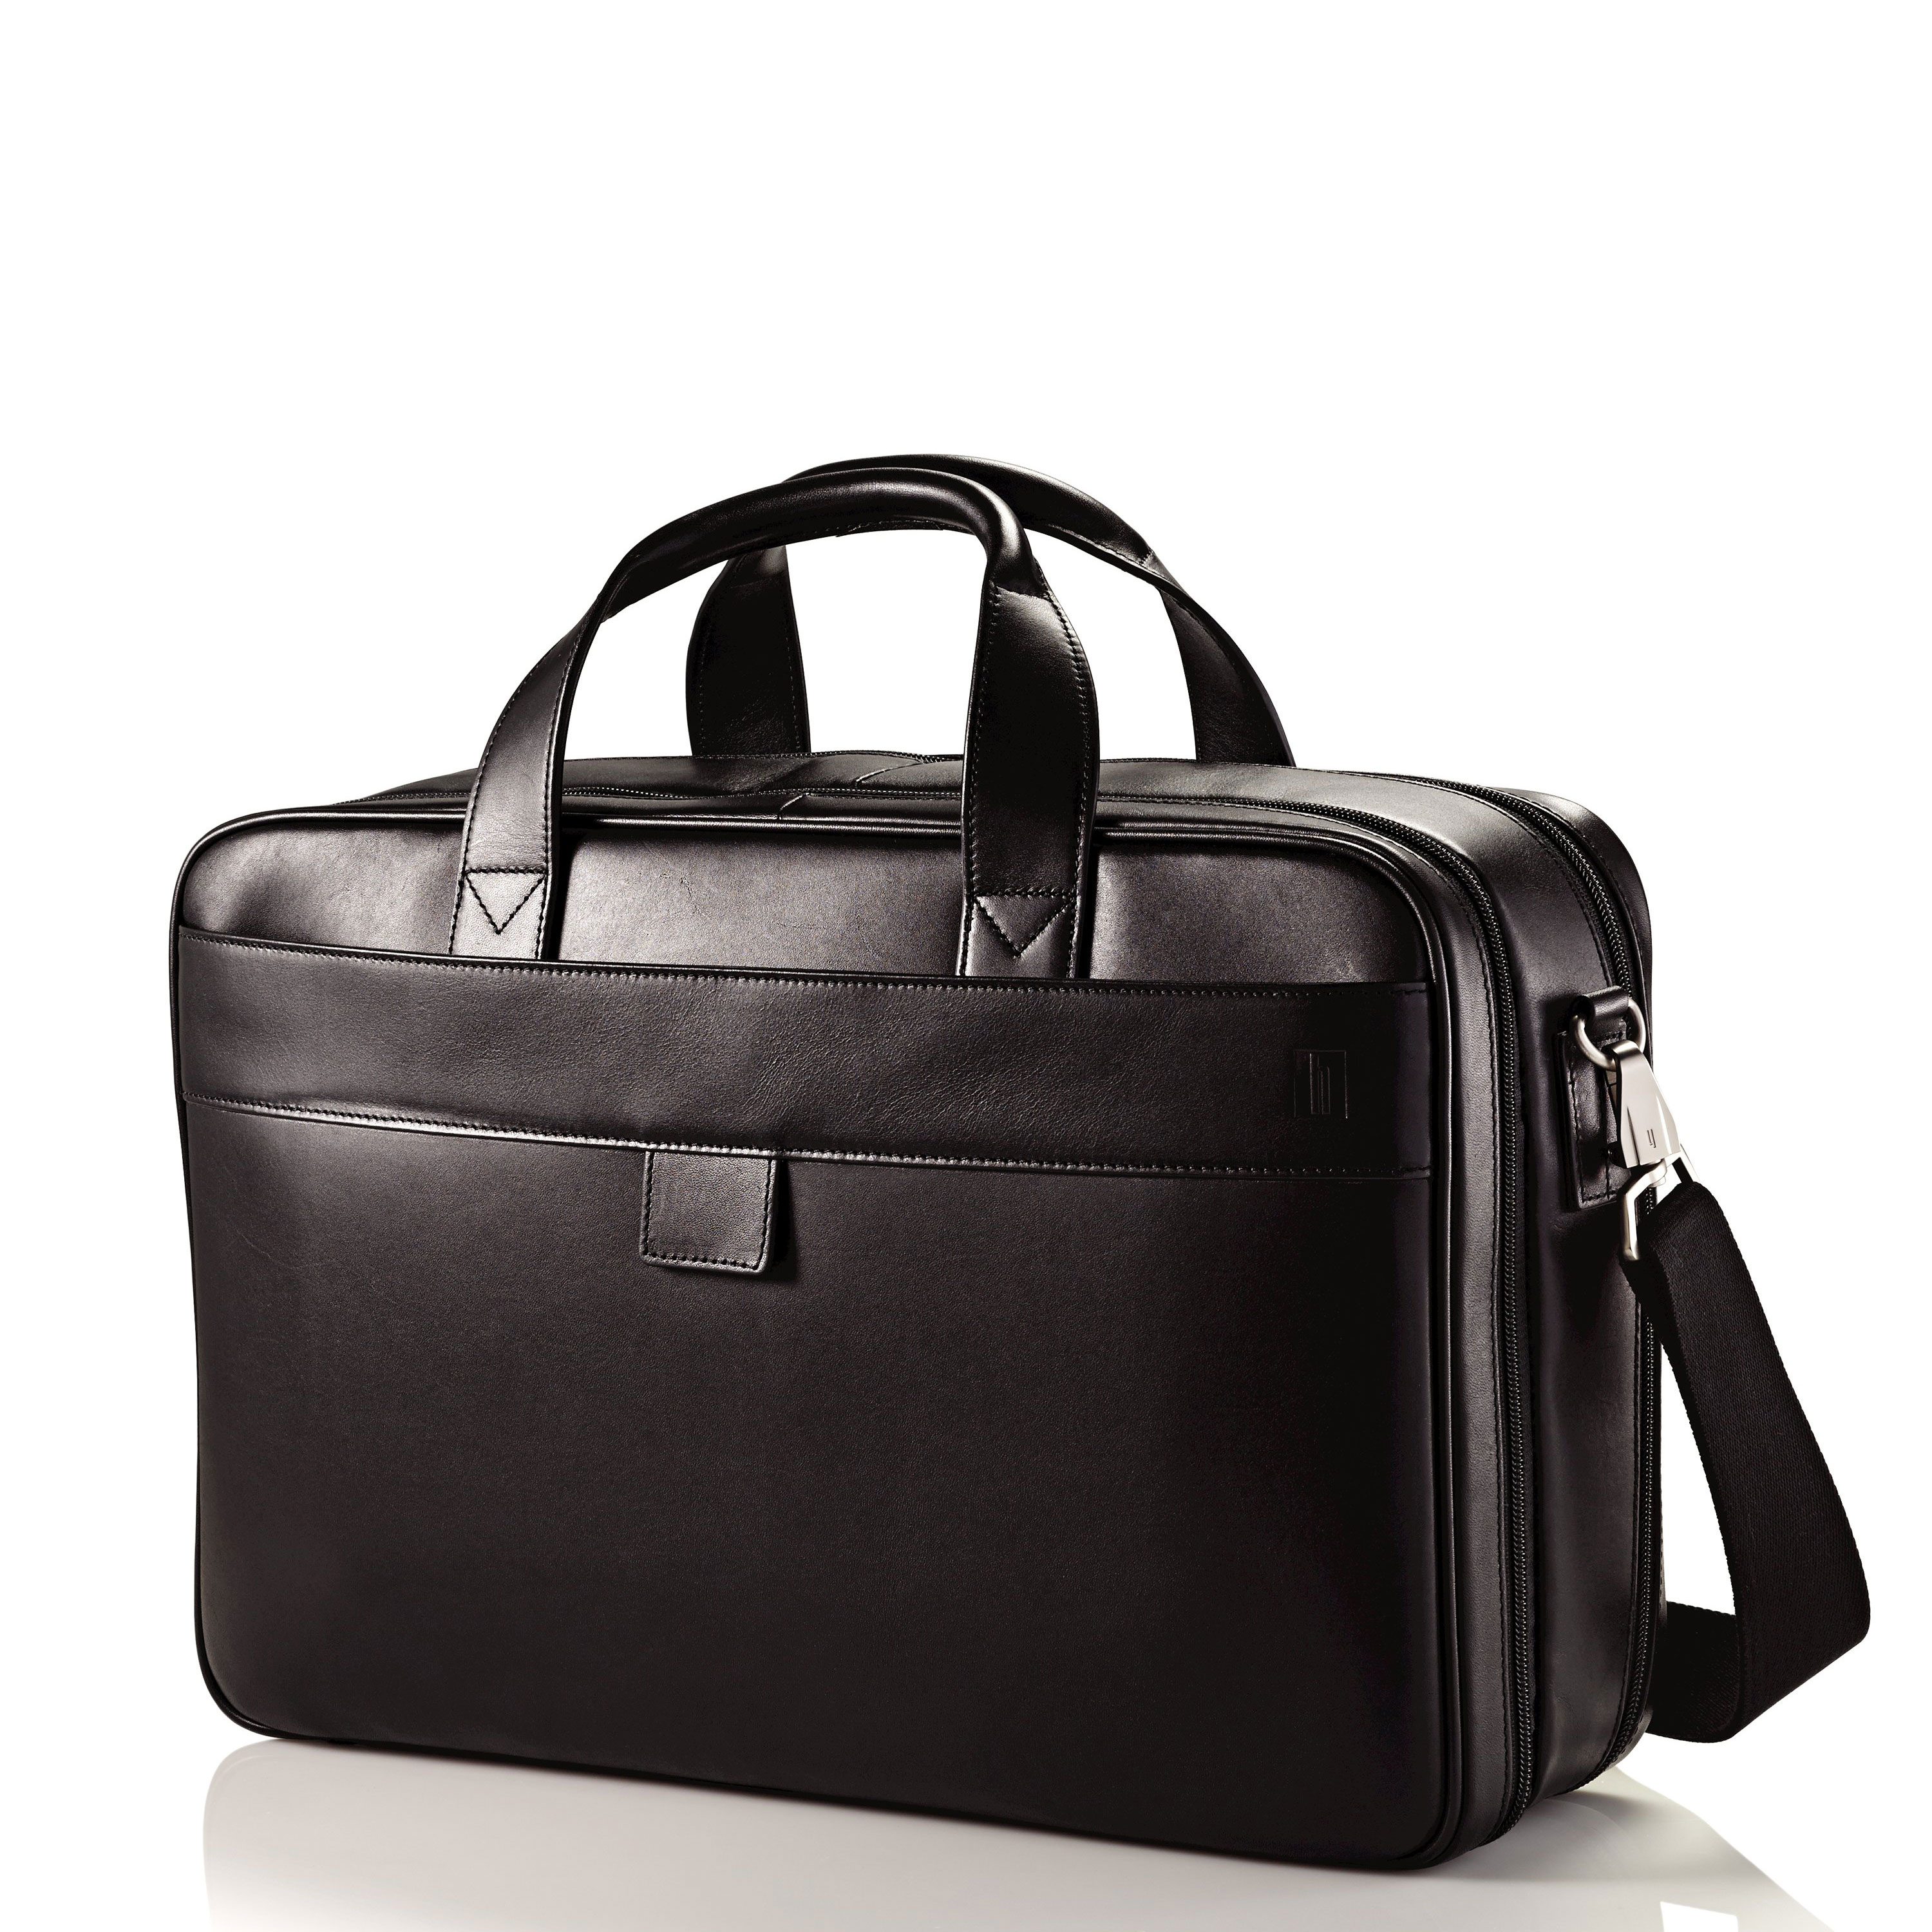 Hartmann Heritage Double Compartment Brief